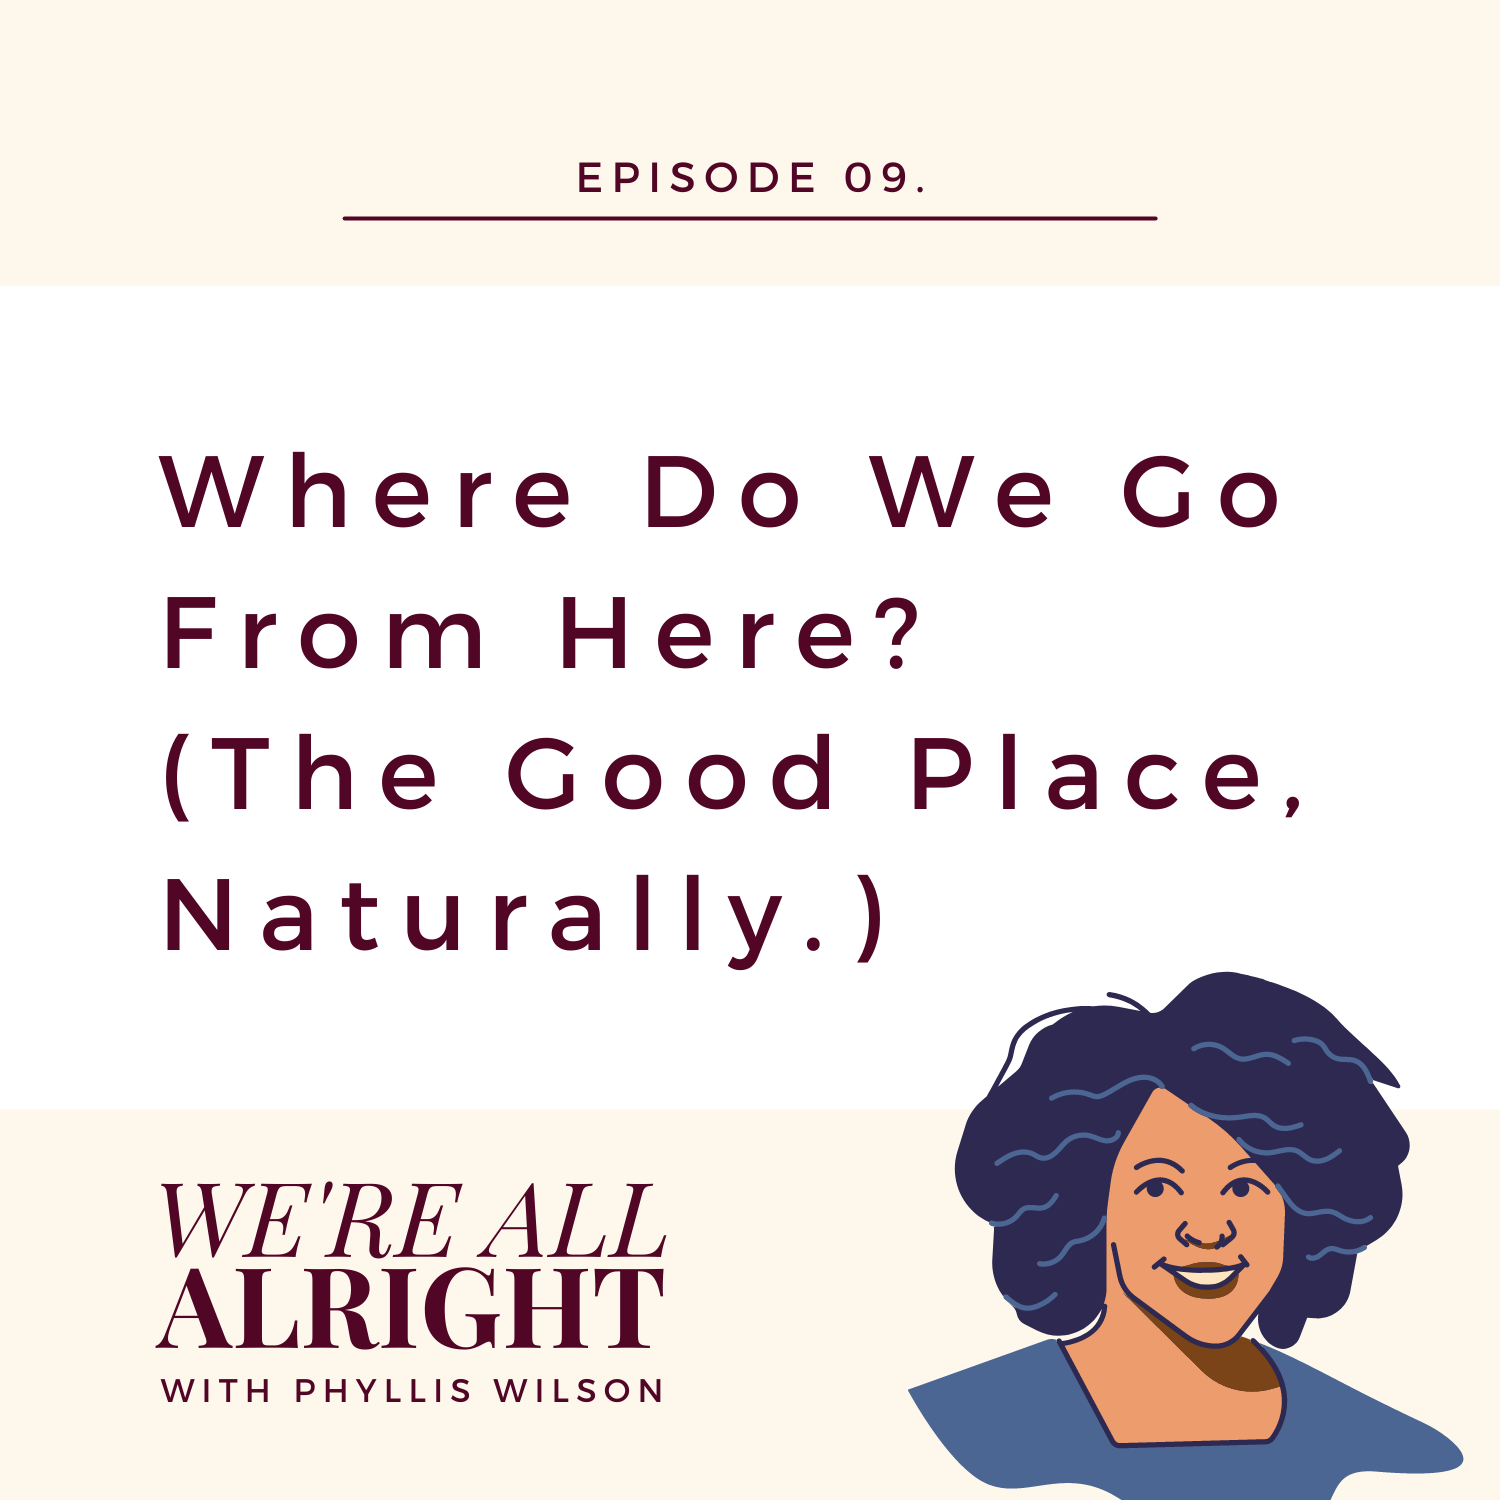 EP 09: Where Do We Go From Here? (The Good Place, Naturally)